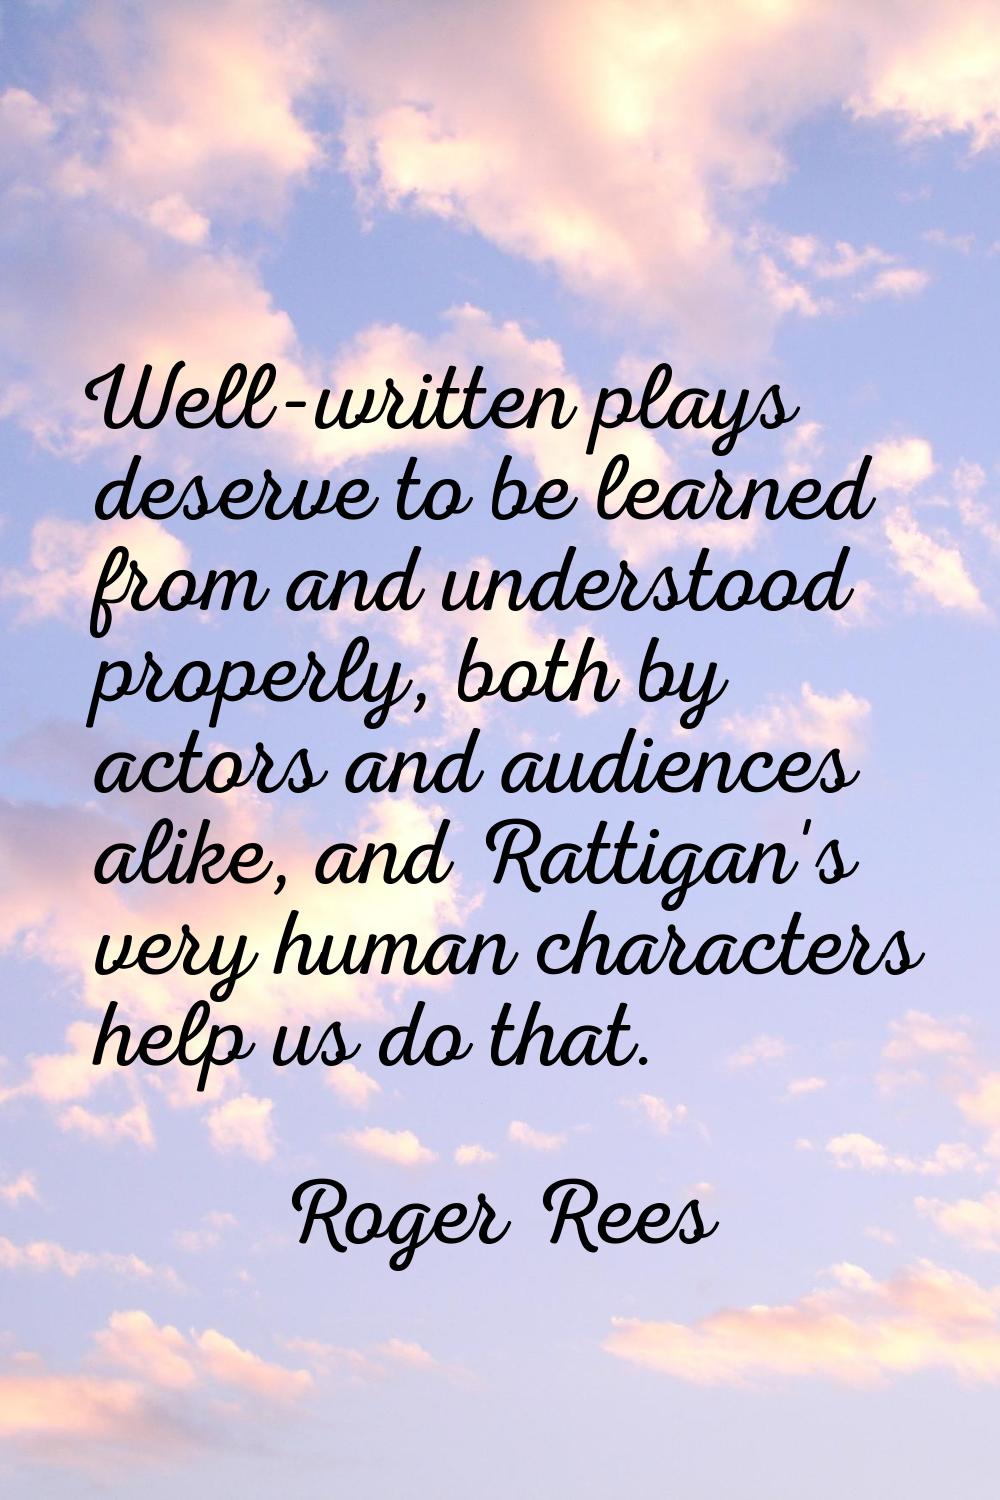 Well-written plays deserve to be learned from and understood properly, both by actors and audiences